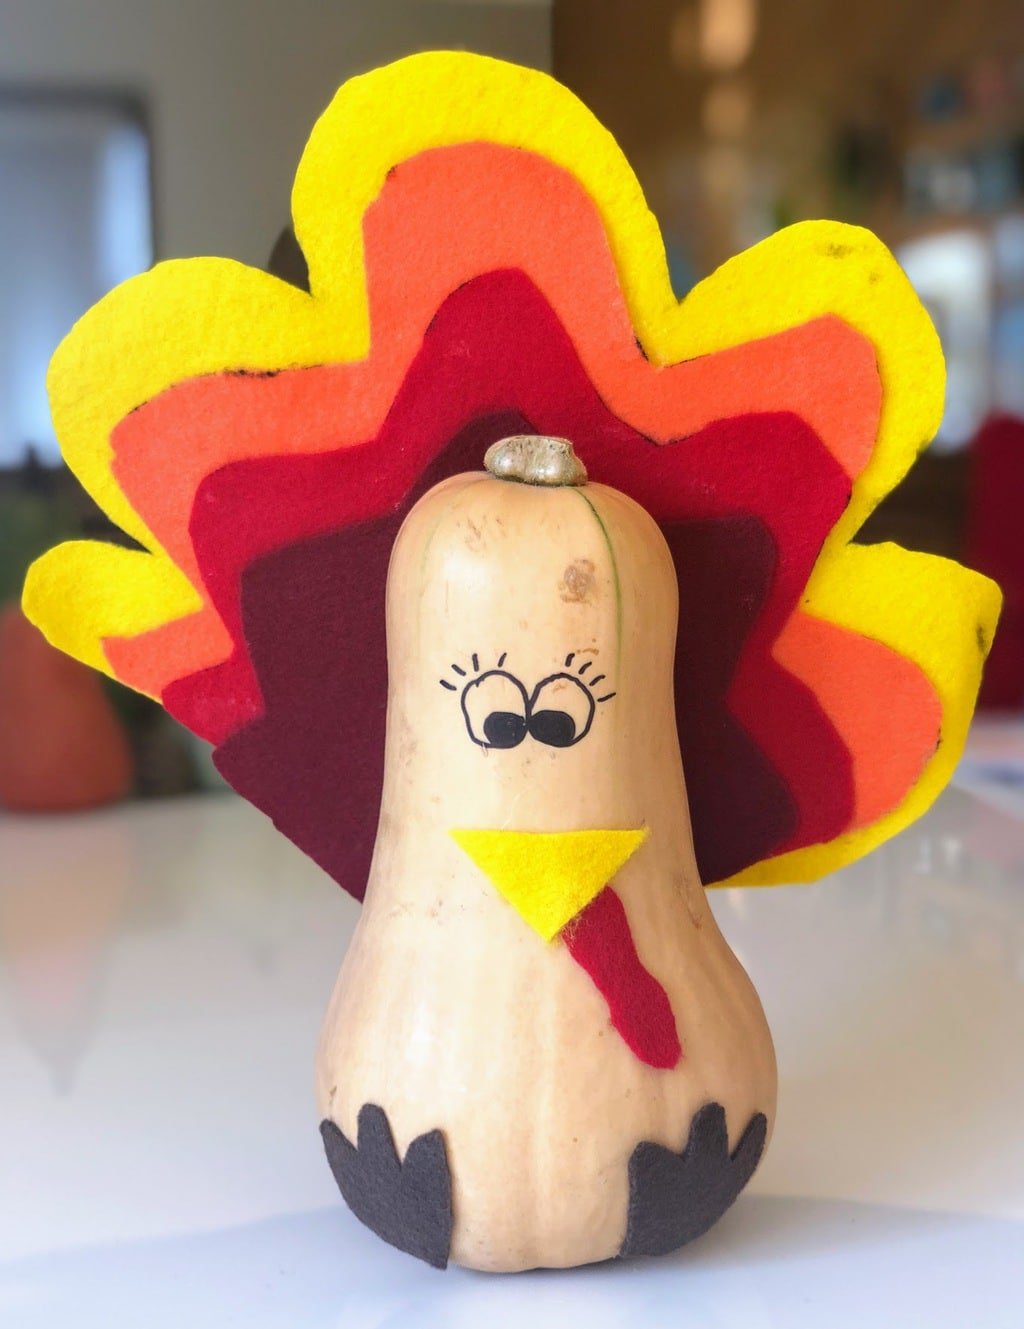 squash decorated as a turkey with drawn-on eyes and fall colored felt tail, beak and feet